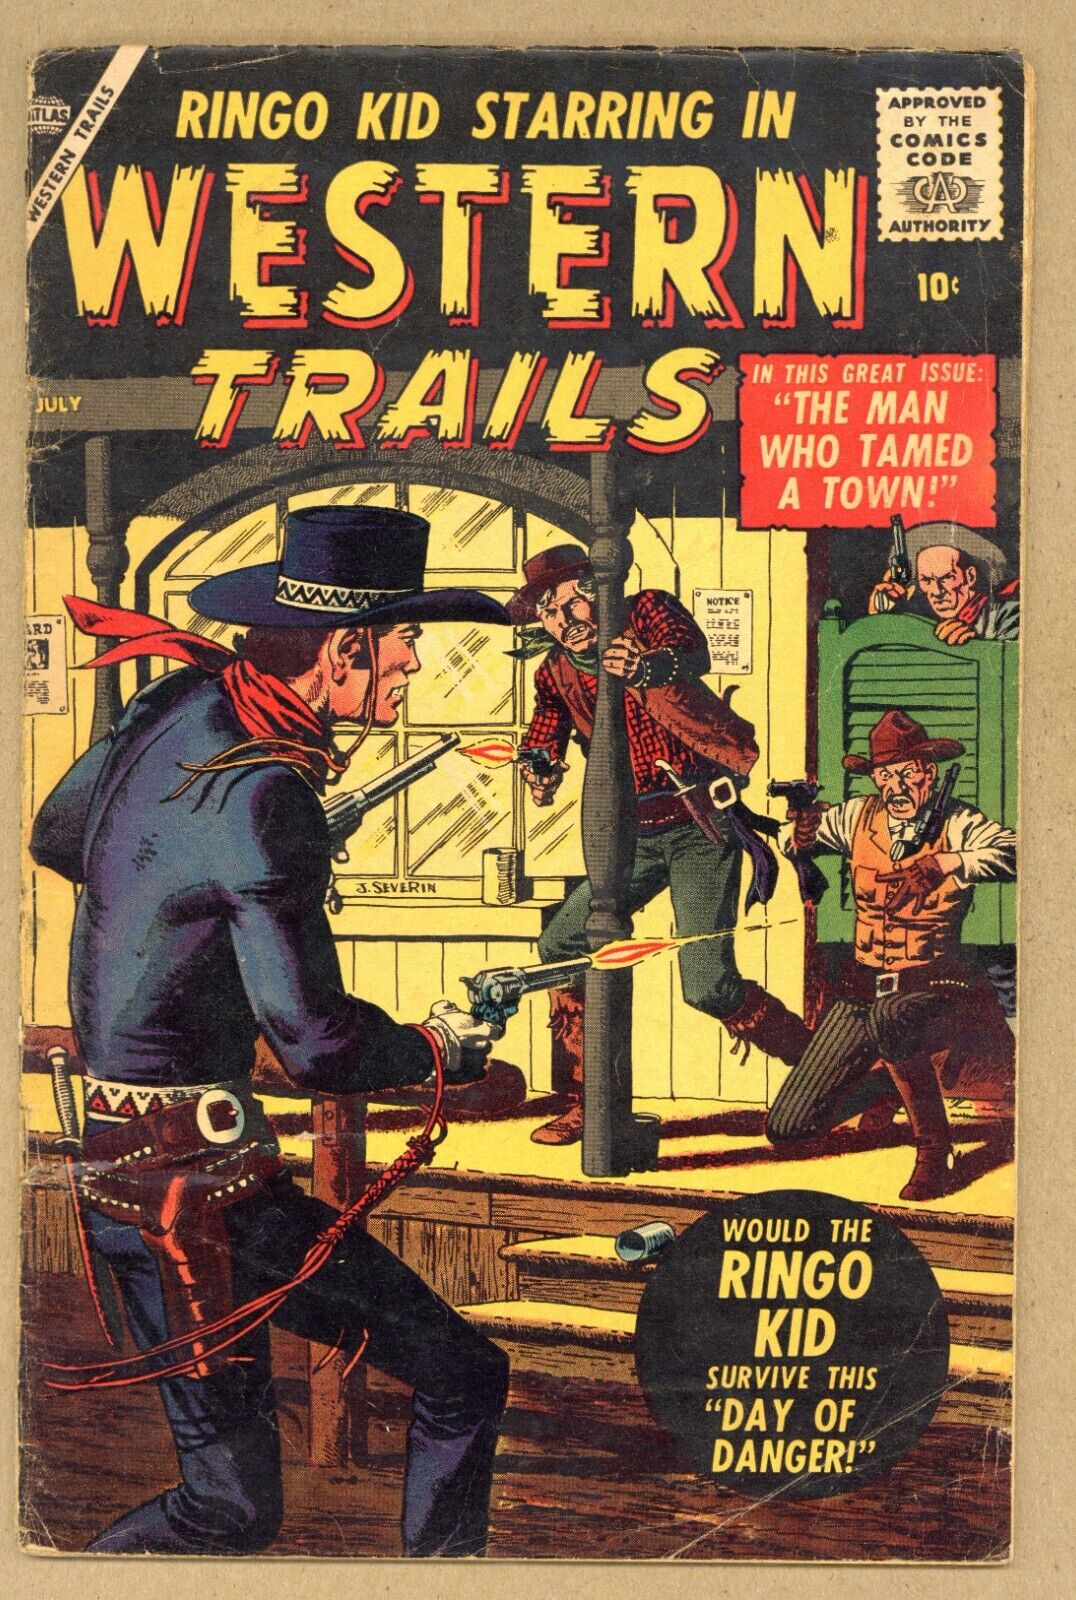 Western Trails #2 GVG Severin cover Maneely Heck Bolle RINGO KID 1957 Atlas W787